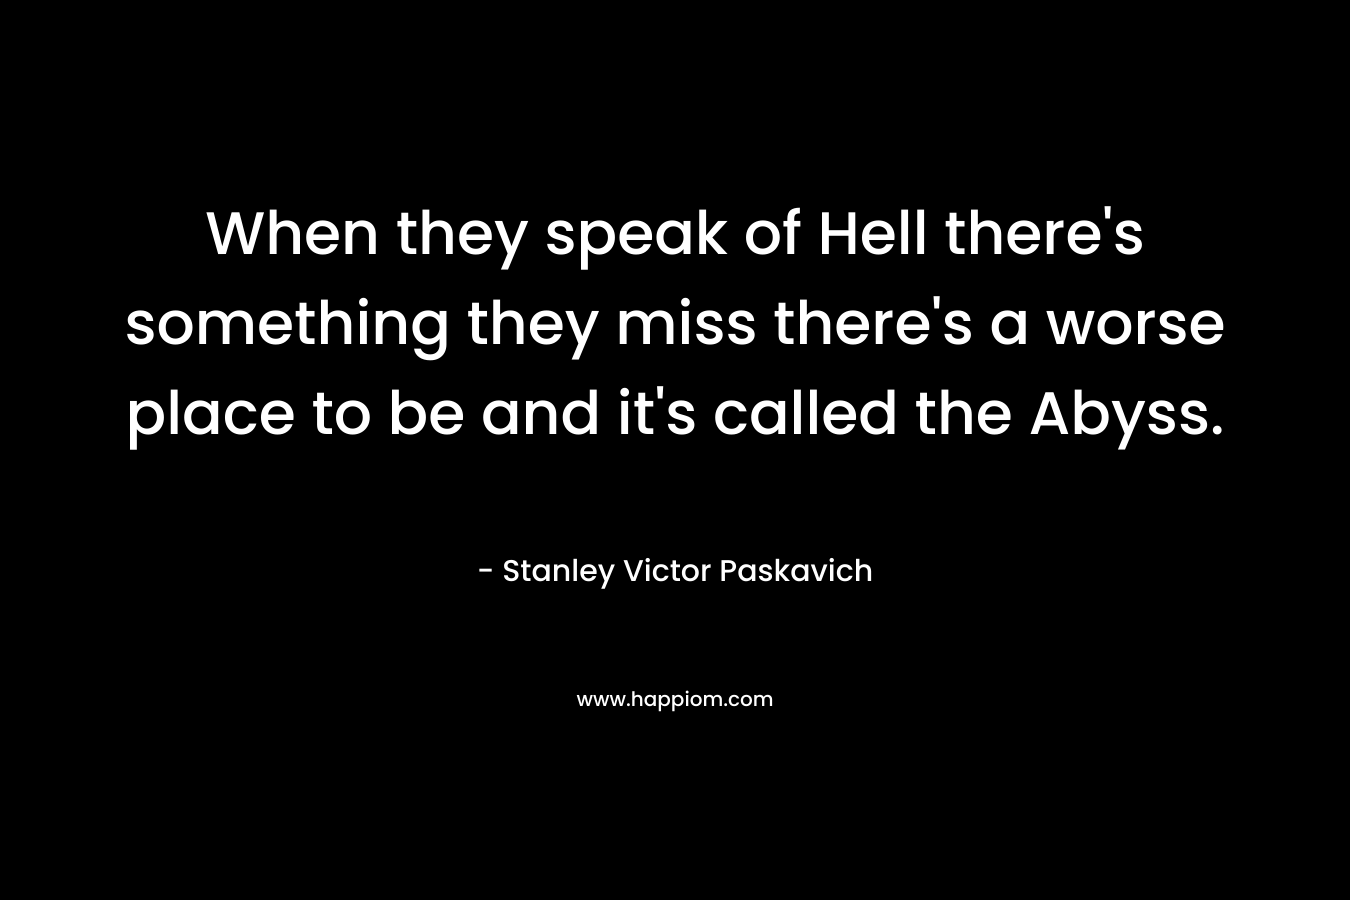 When they speak of Hell there's something they miss there's a worse place to be and it's called the Abyss.